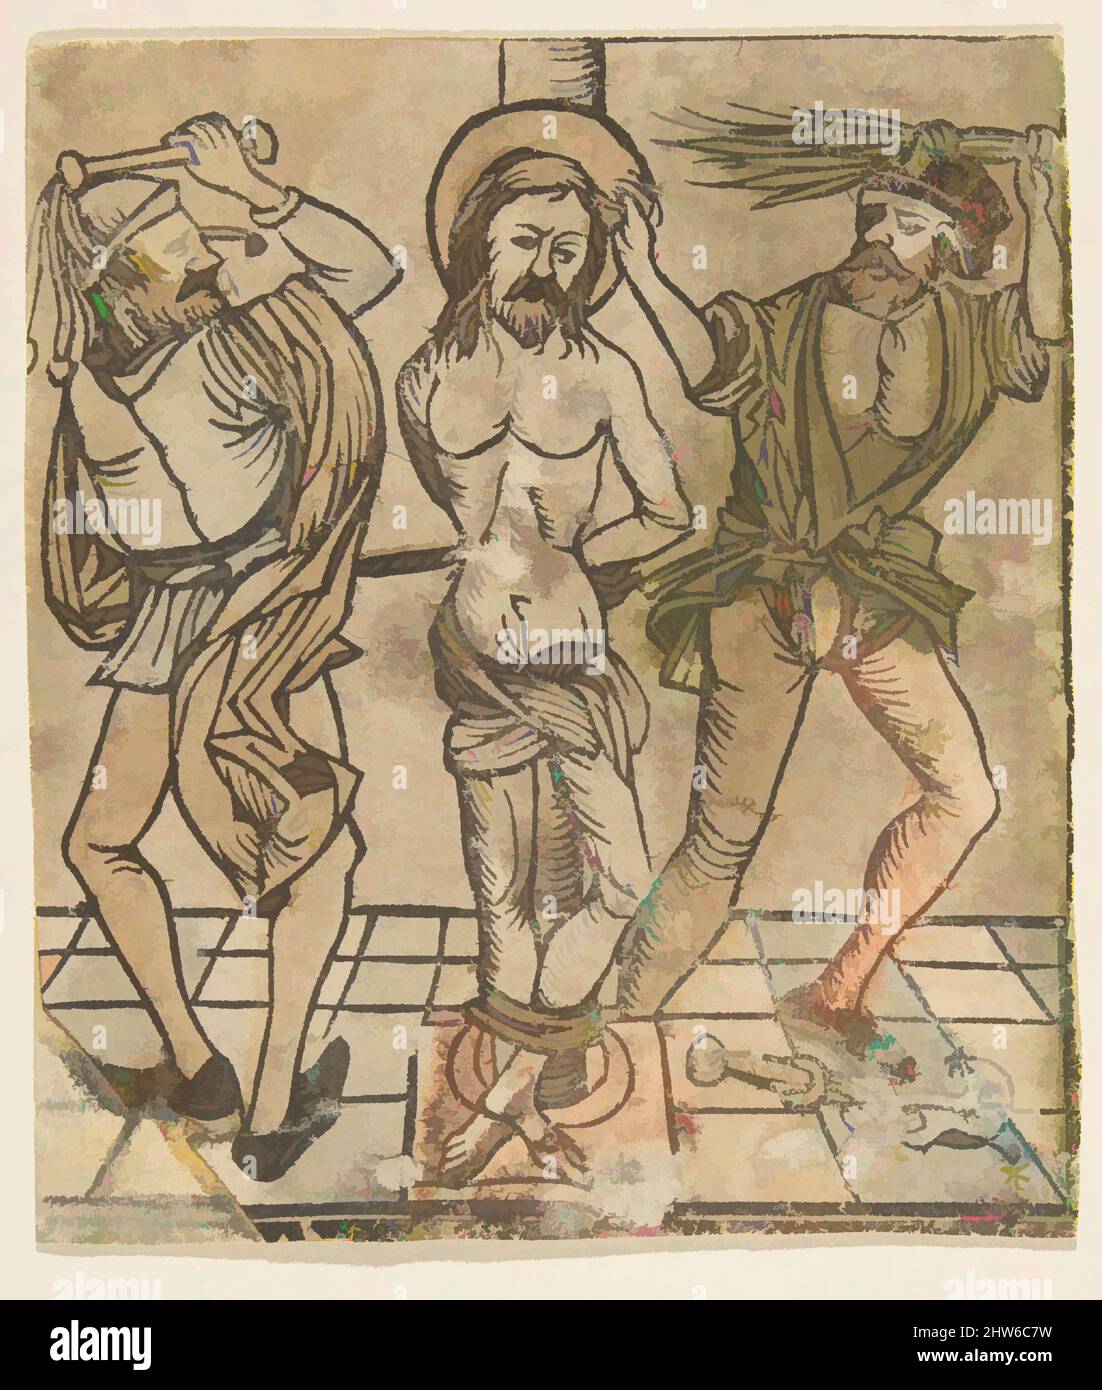 Art inspired by The Flagellation, 15th century, Woodcut, hand-colored, sheet: 4 1/4 x 3 11/16 in. (10.8 x 9.4 cm), Prints, Anonymous, German, 15th century, Classic works modernized by Artotop with a splash of modernity. Shapes, color and value, eye-catching visual impact on art. Emotions through freedom of artworks in a contemporary way. A timeless message pursuing a wildly creative new direction. Artists turning to the digital medium and creating the Artotop NFT Stock Photo